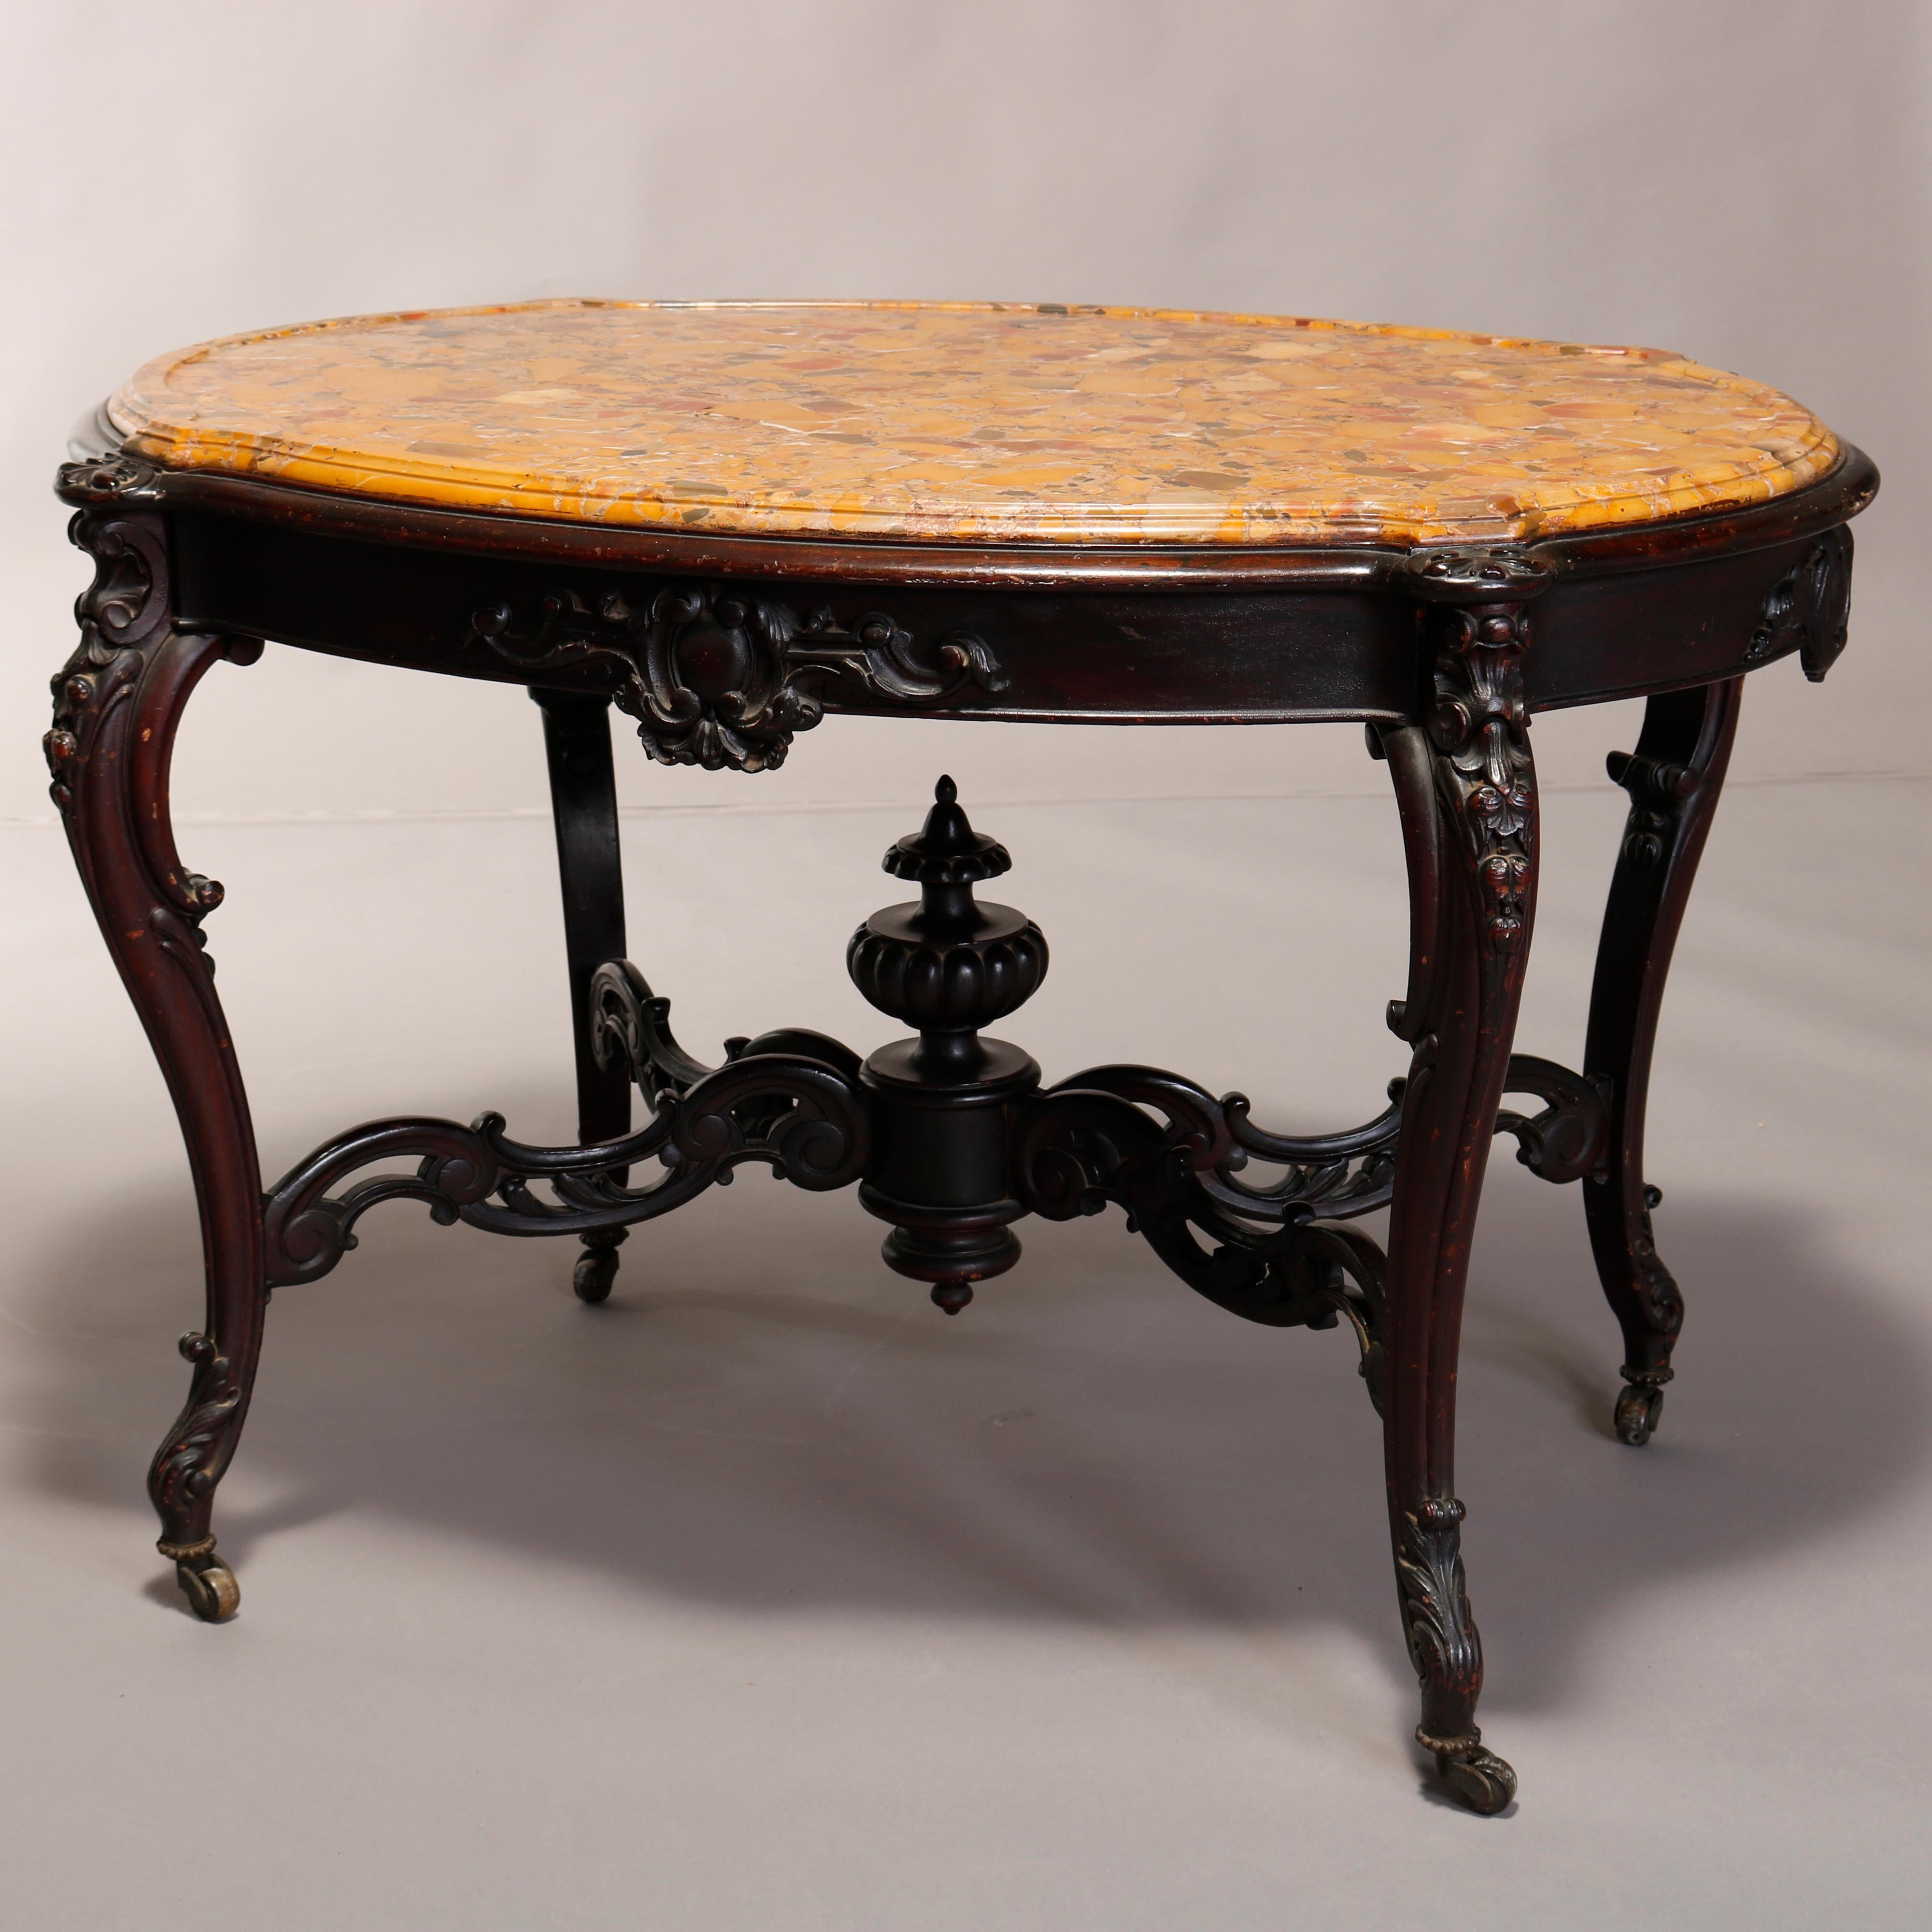 American Antique Victorian Carved Rosewood and Fossilized Marble Top Parlor Table